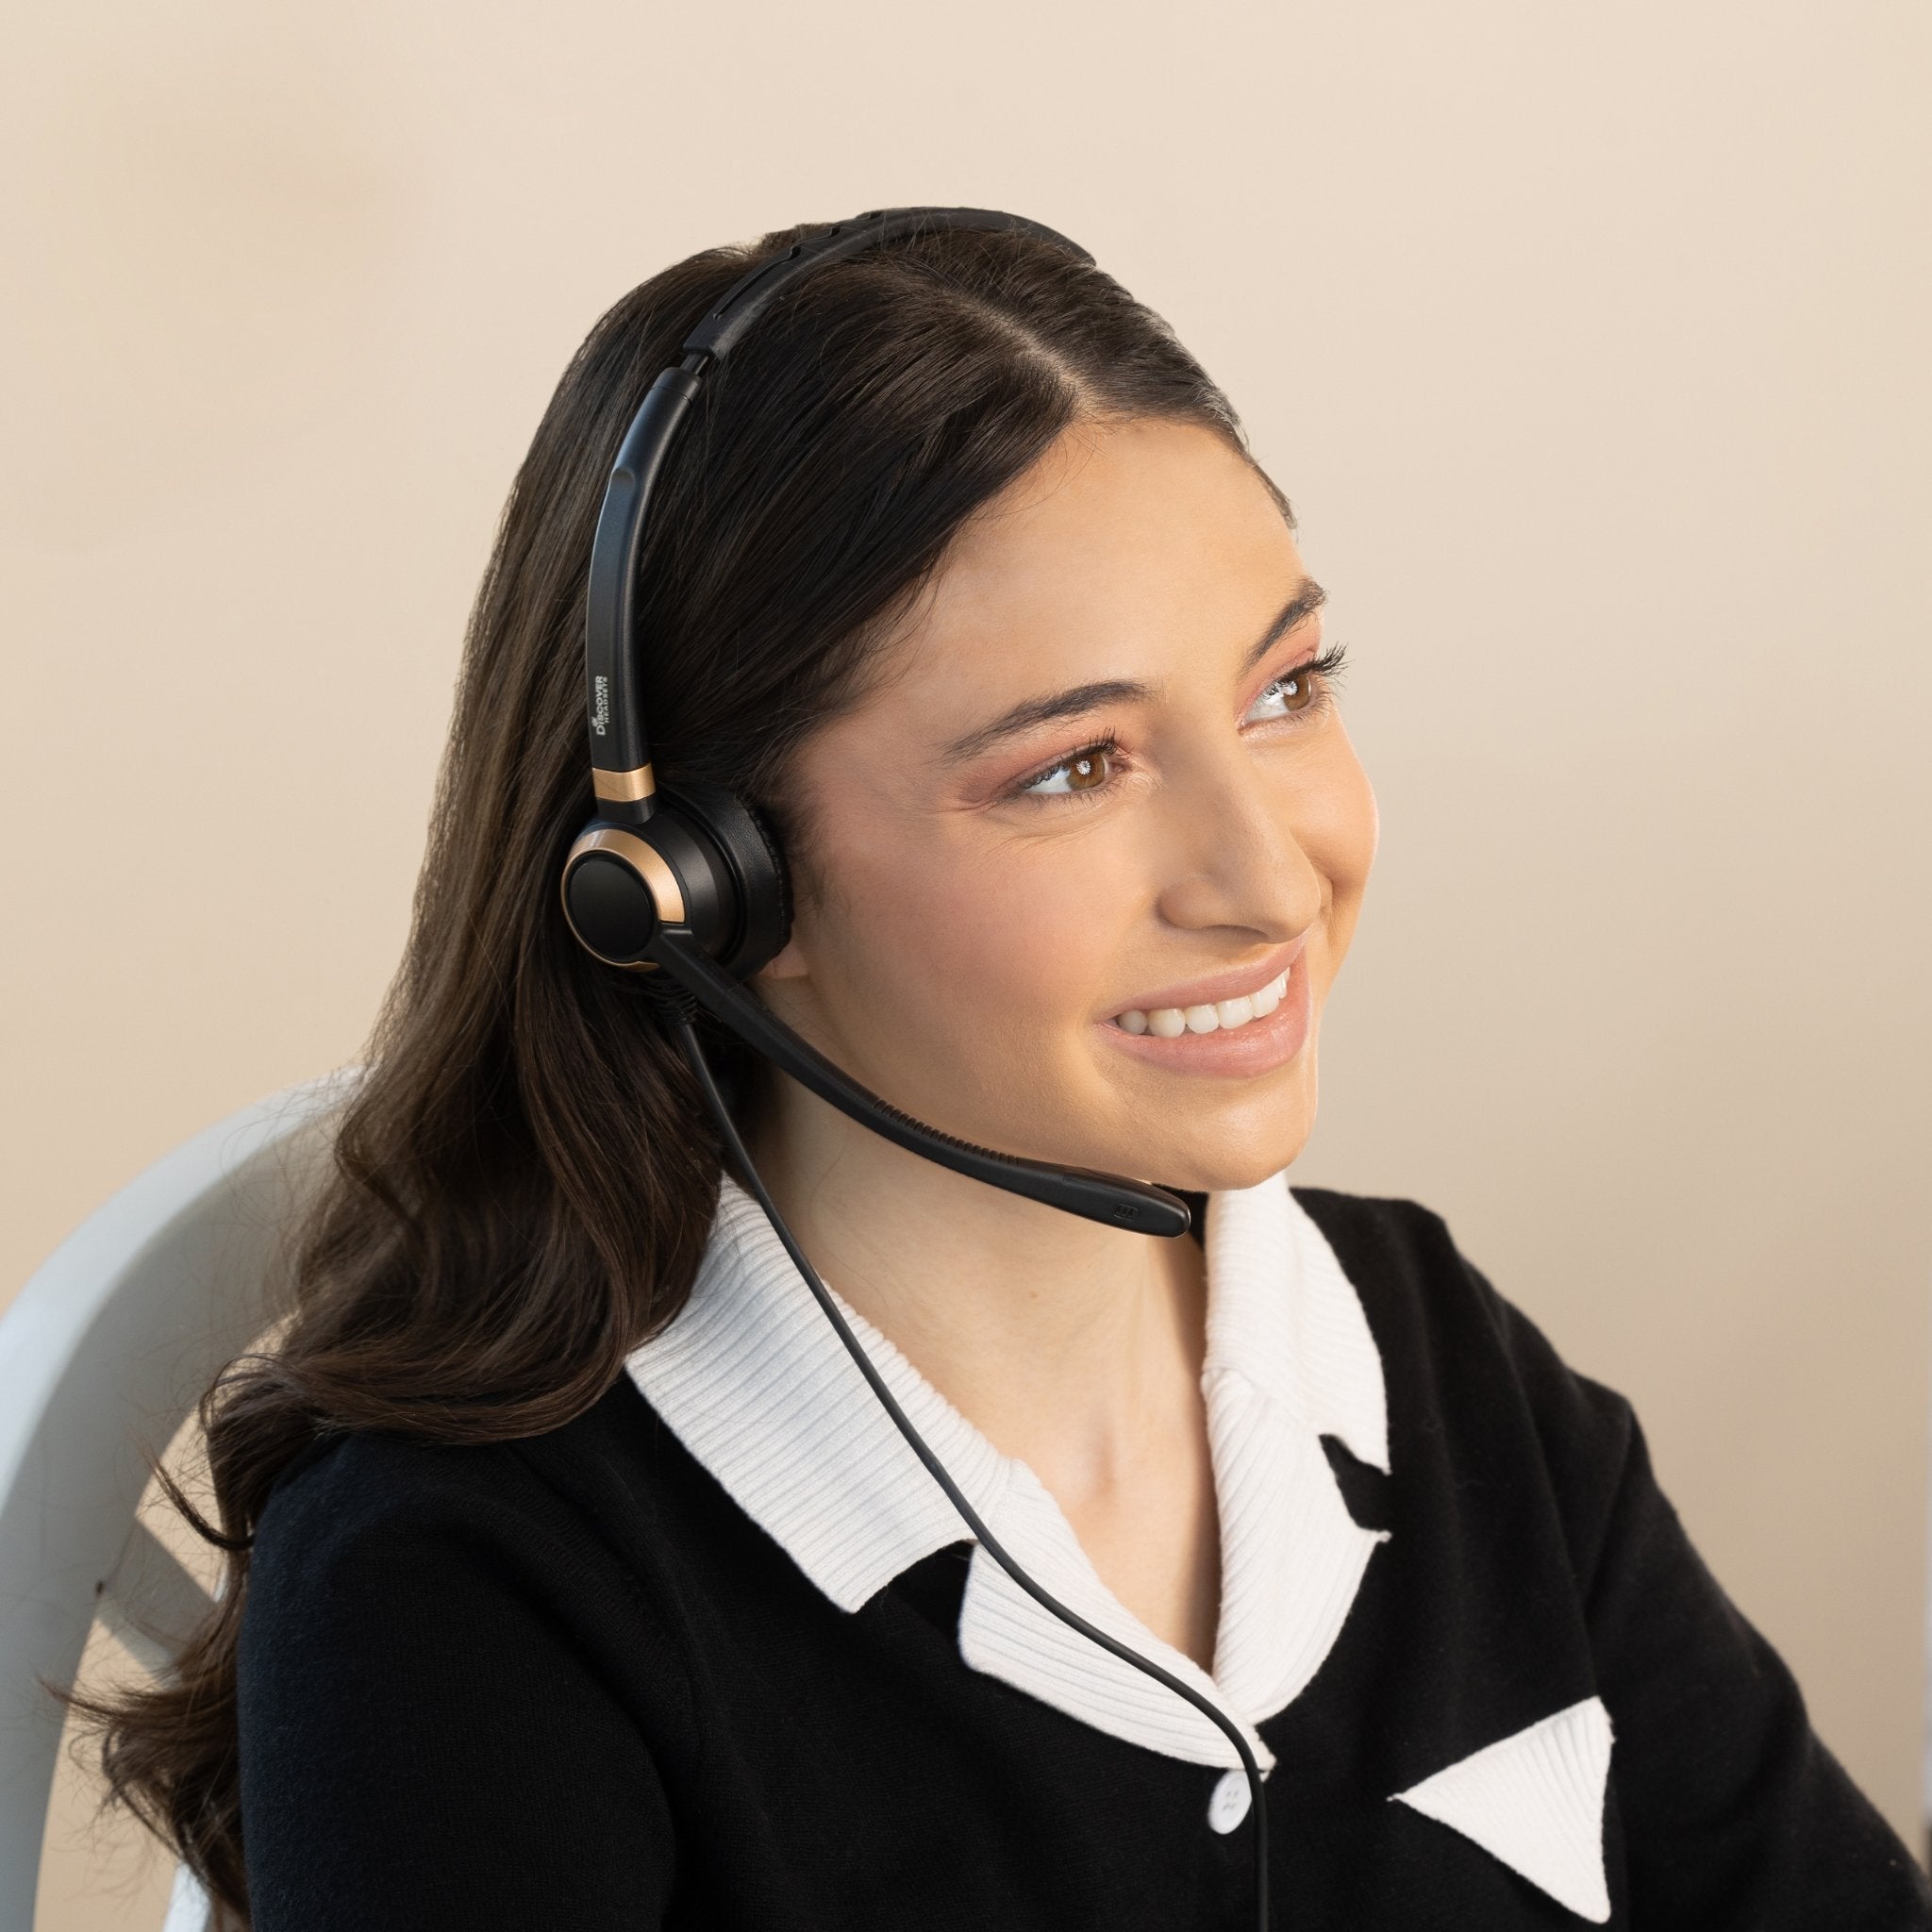 Discover D711U Single Speaker Wired USB Headset For Professionals - Headset Advisor